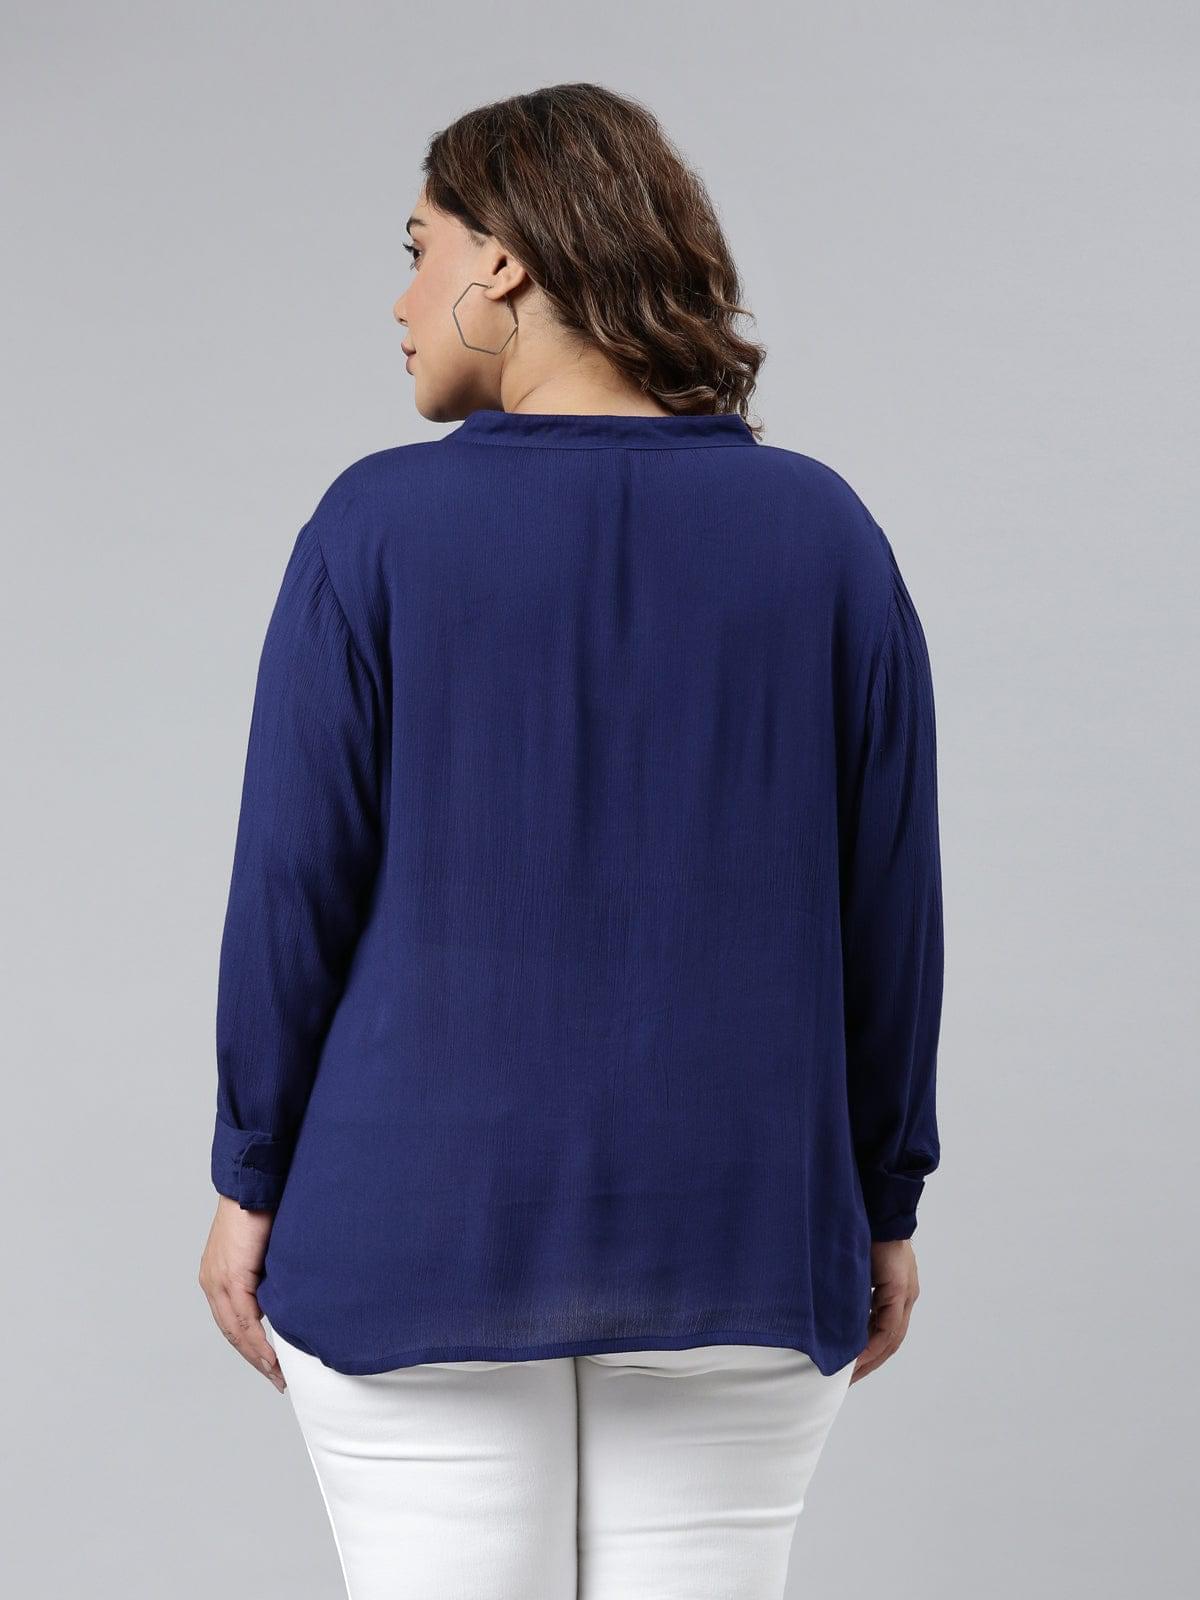 buy  women's blue shirt on online by the Shaili 